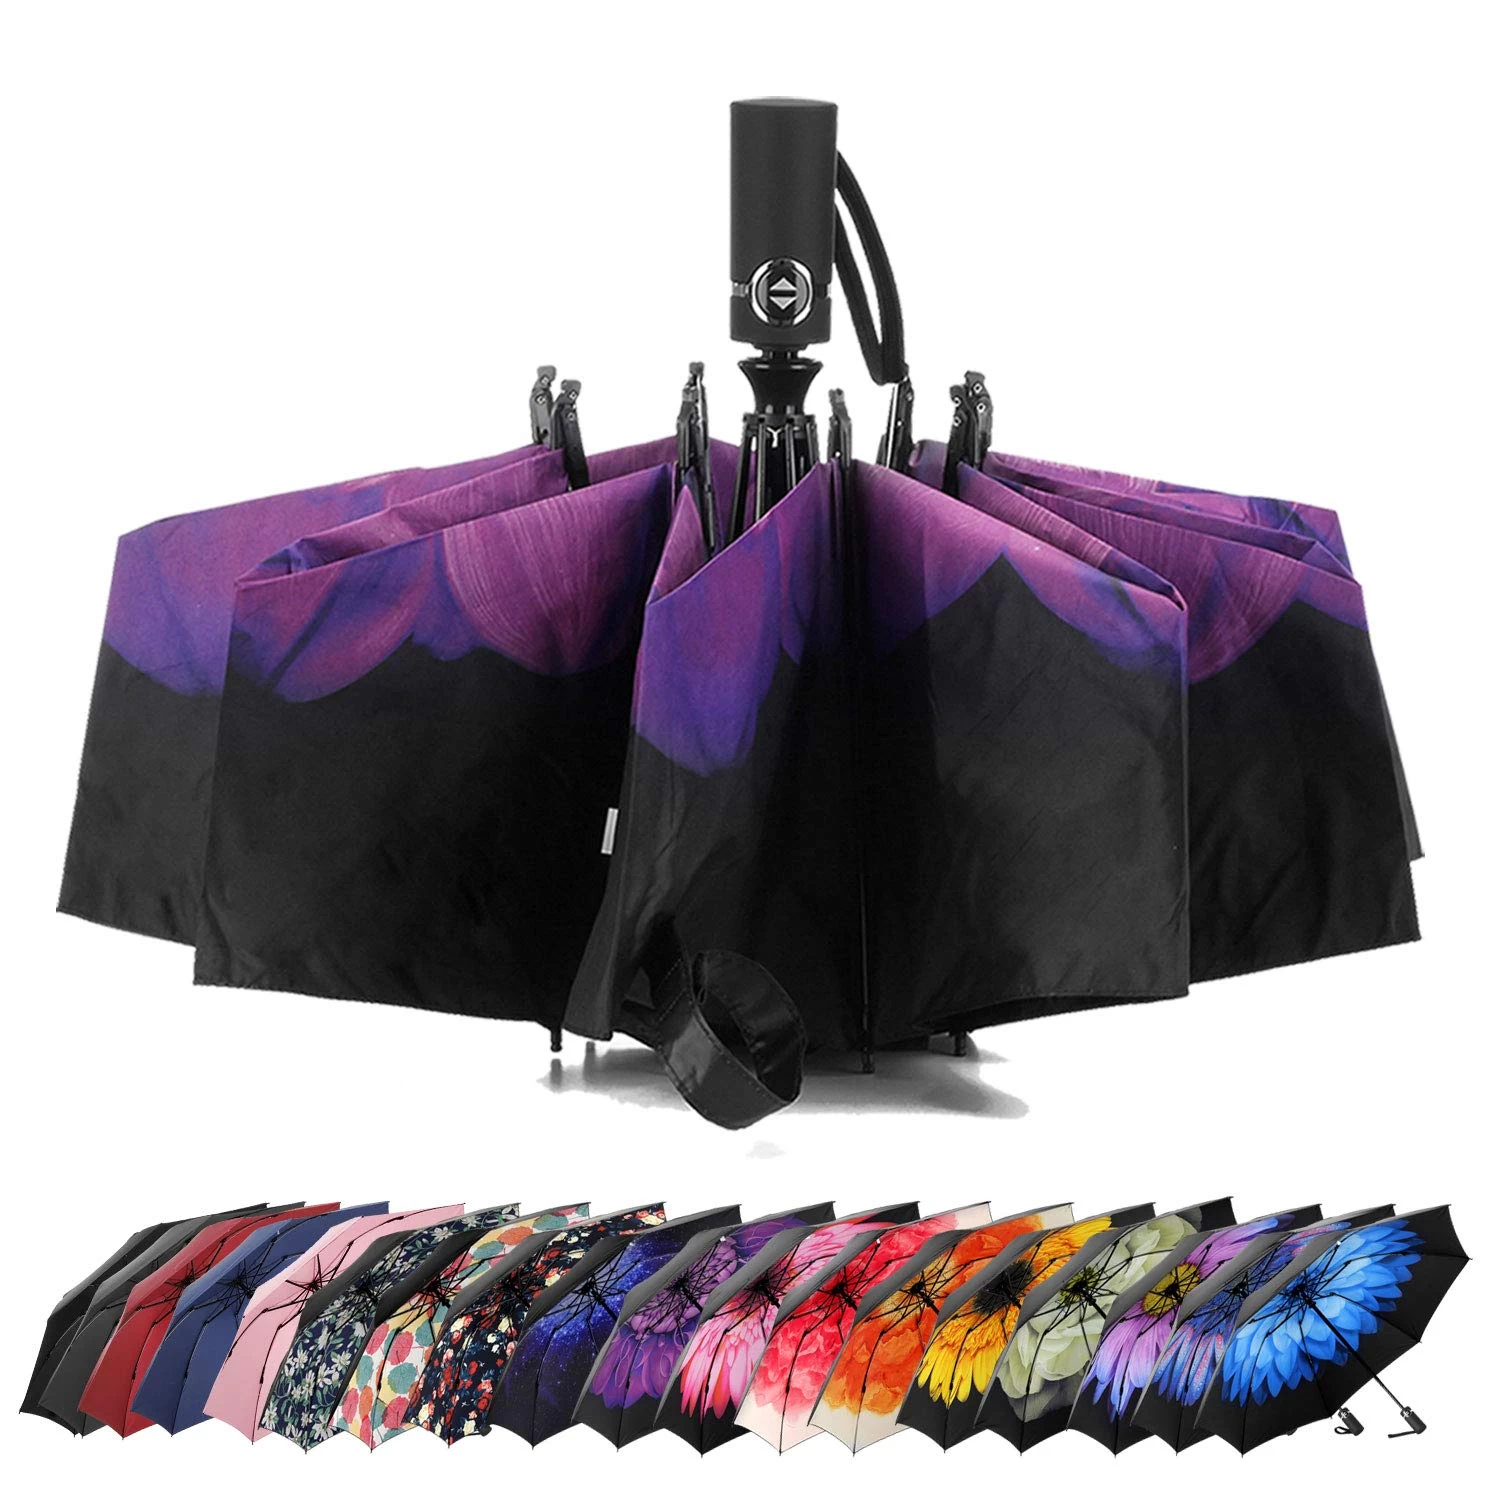 Fully Auto Open and Close Windproof Reverse Umbrellas